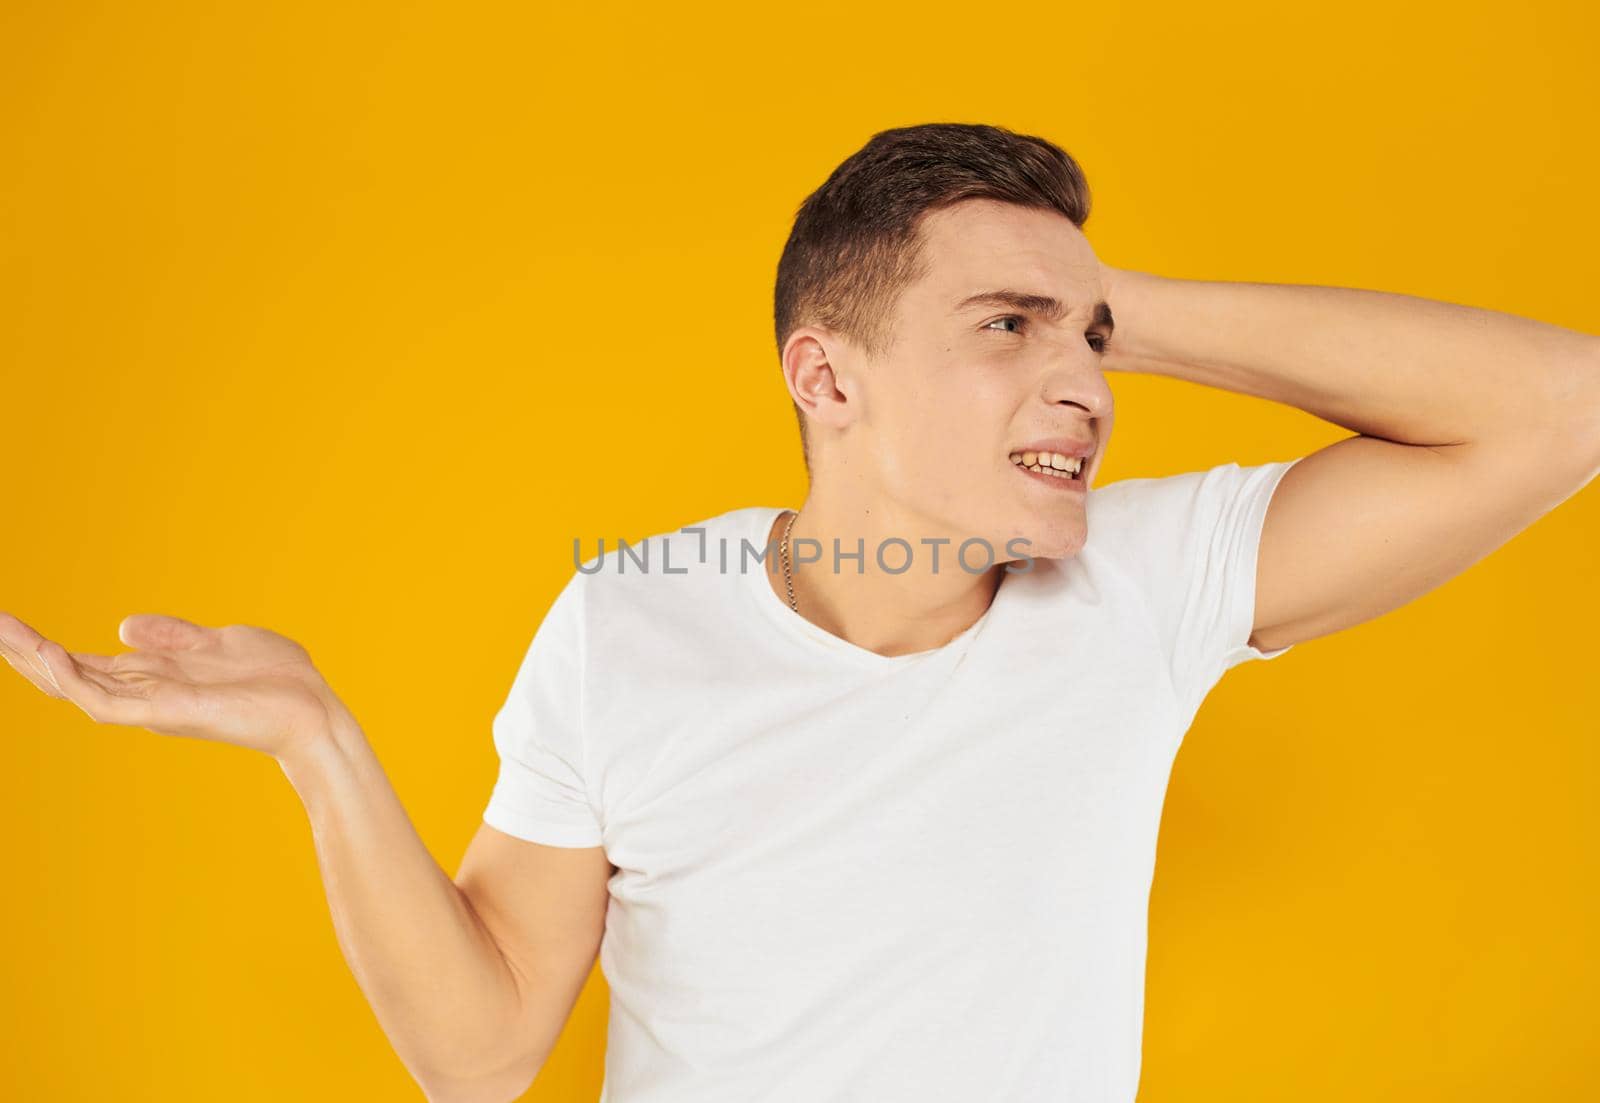 A guy in a white T-shirt spreads his arms to the sides on a yellow background emotions model by SHOTPRIME